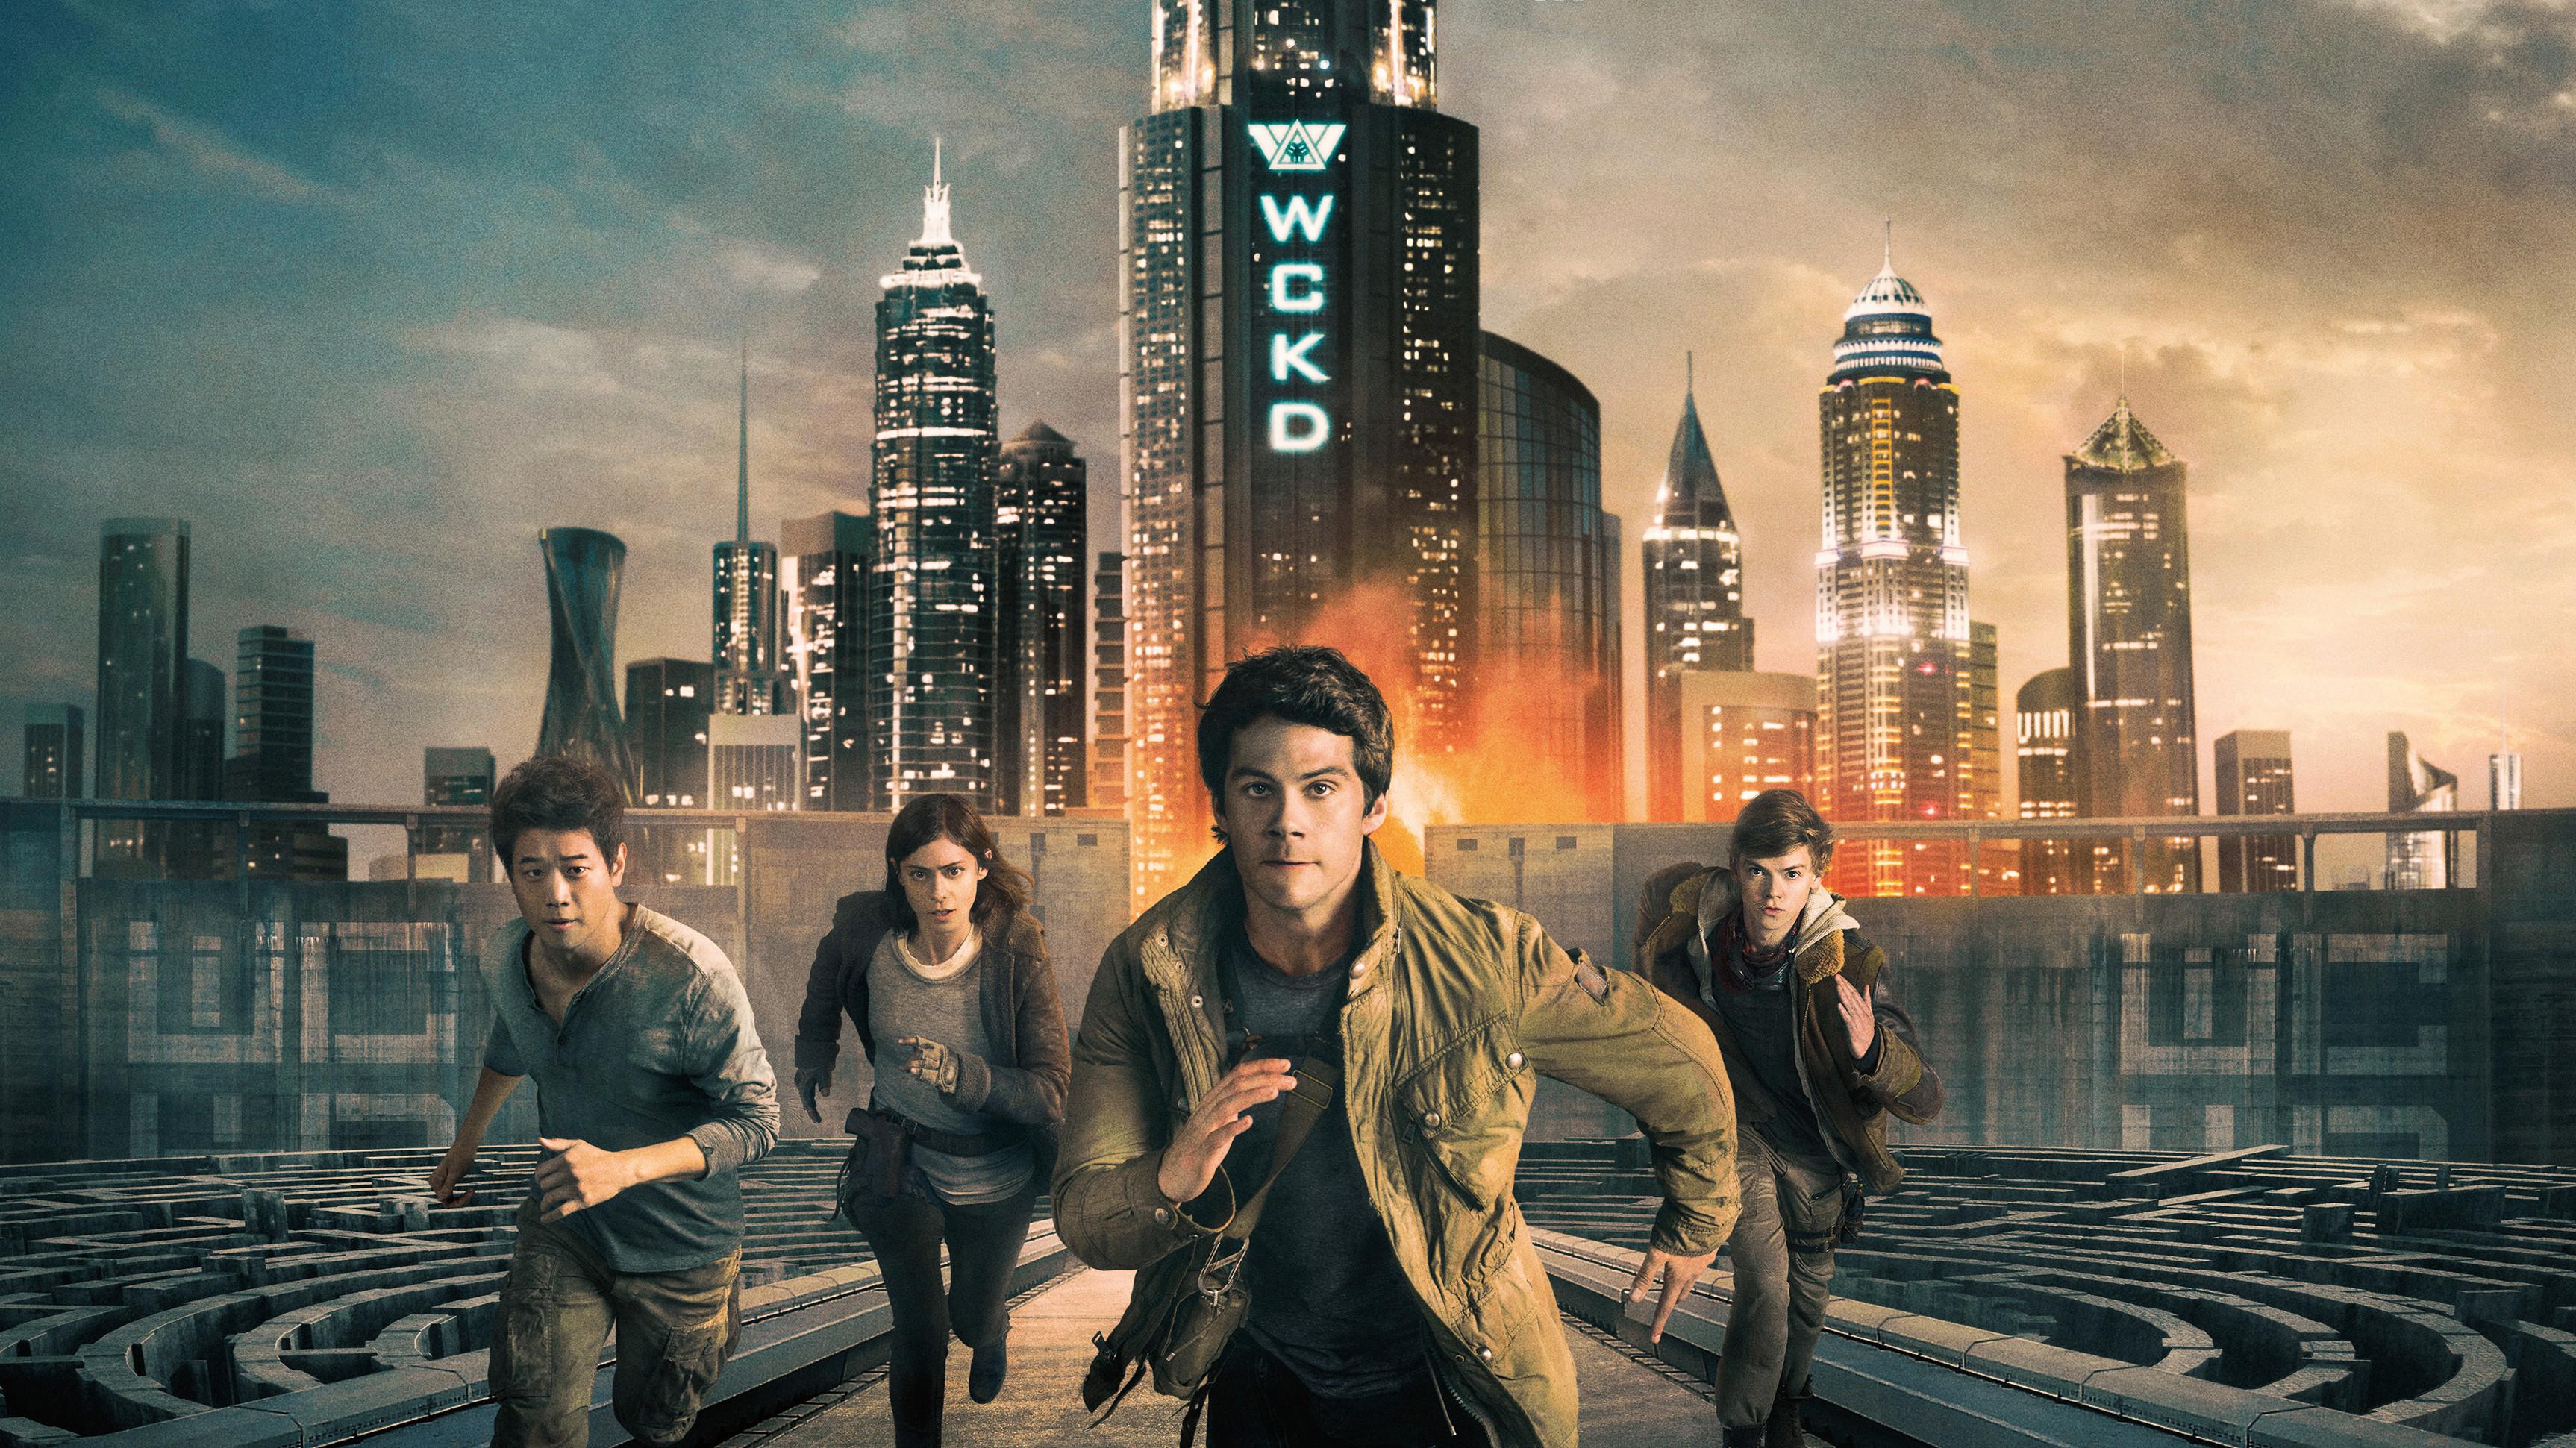 The Maze Runner Wallpaper background picture